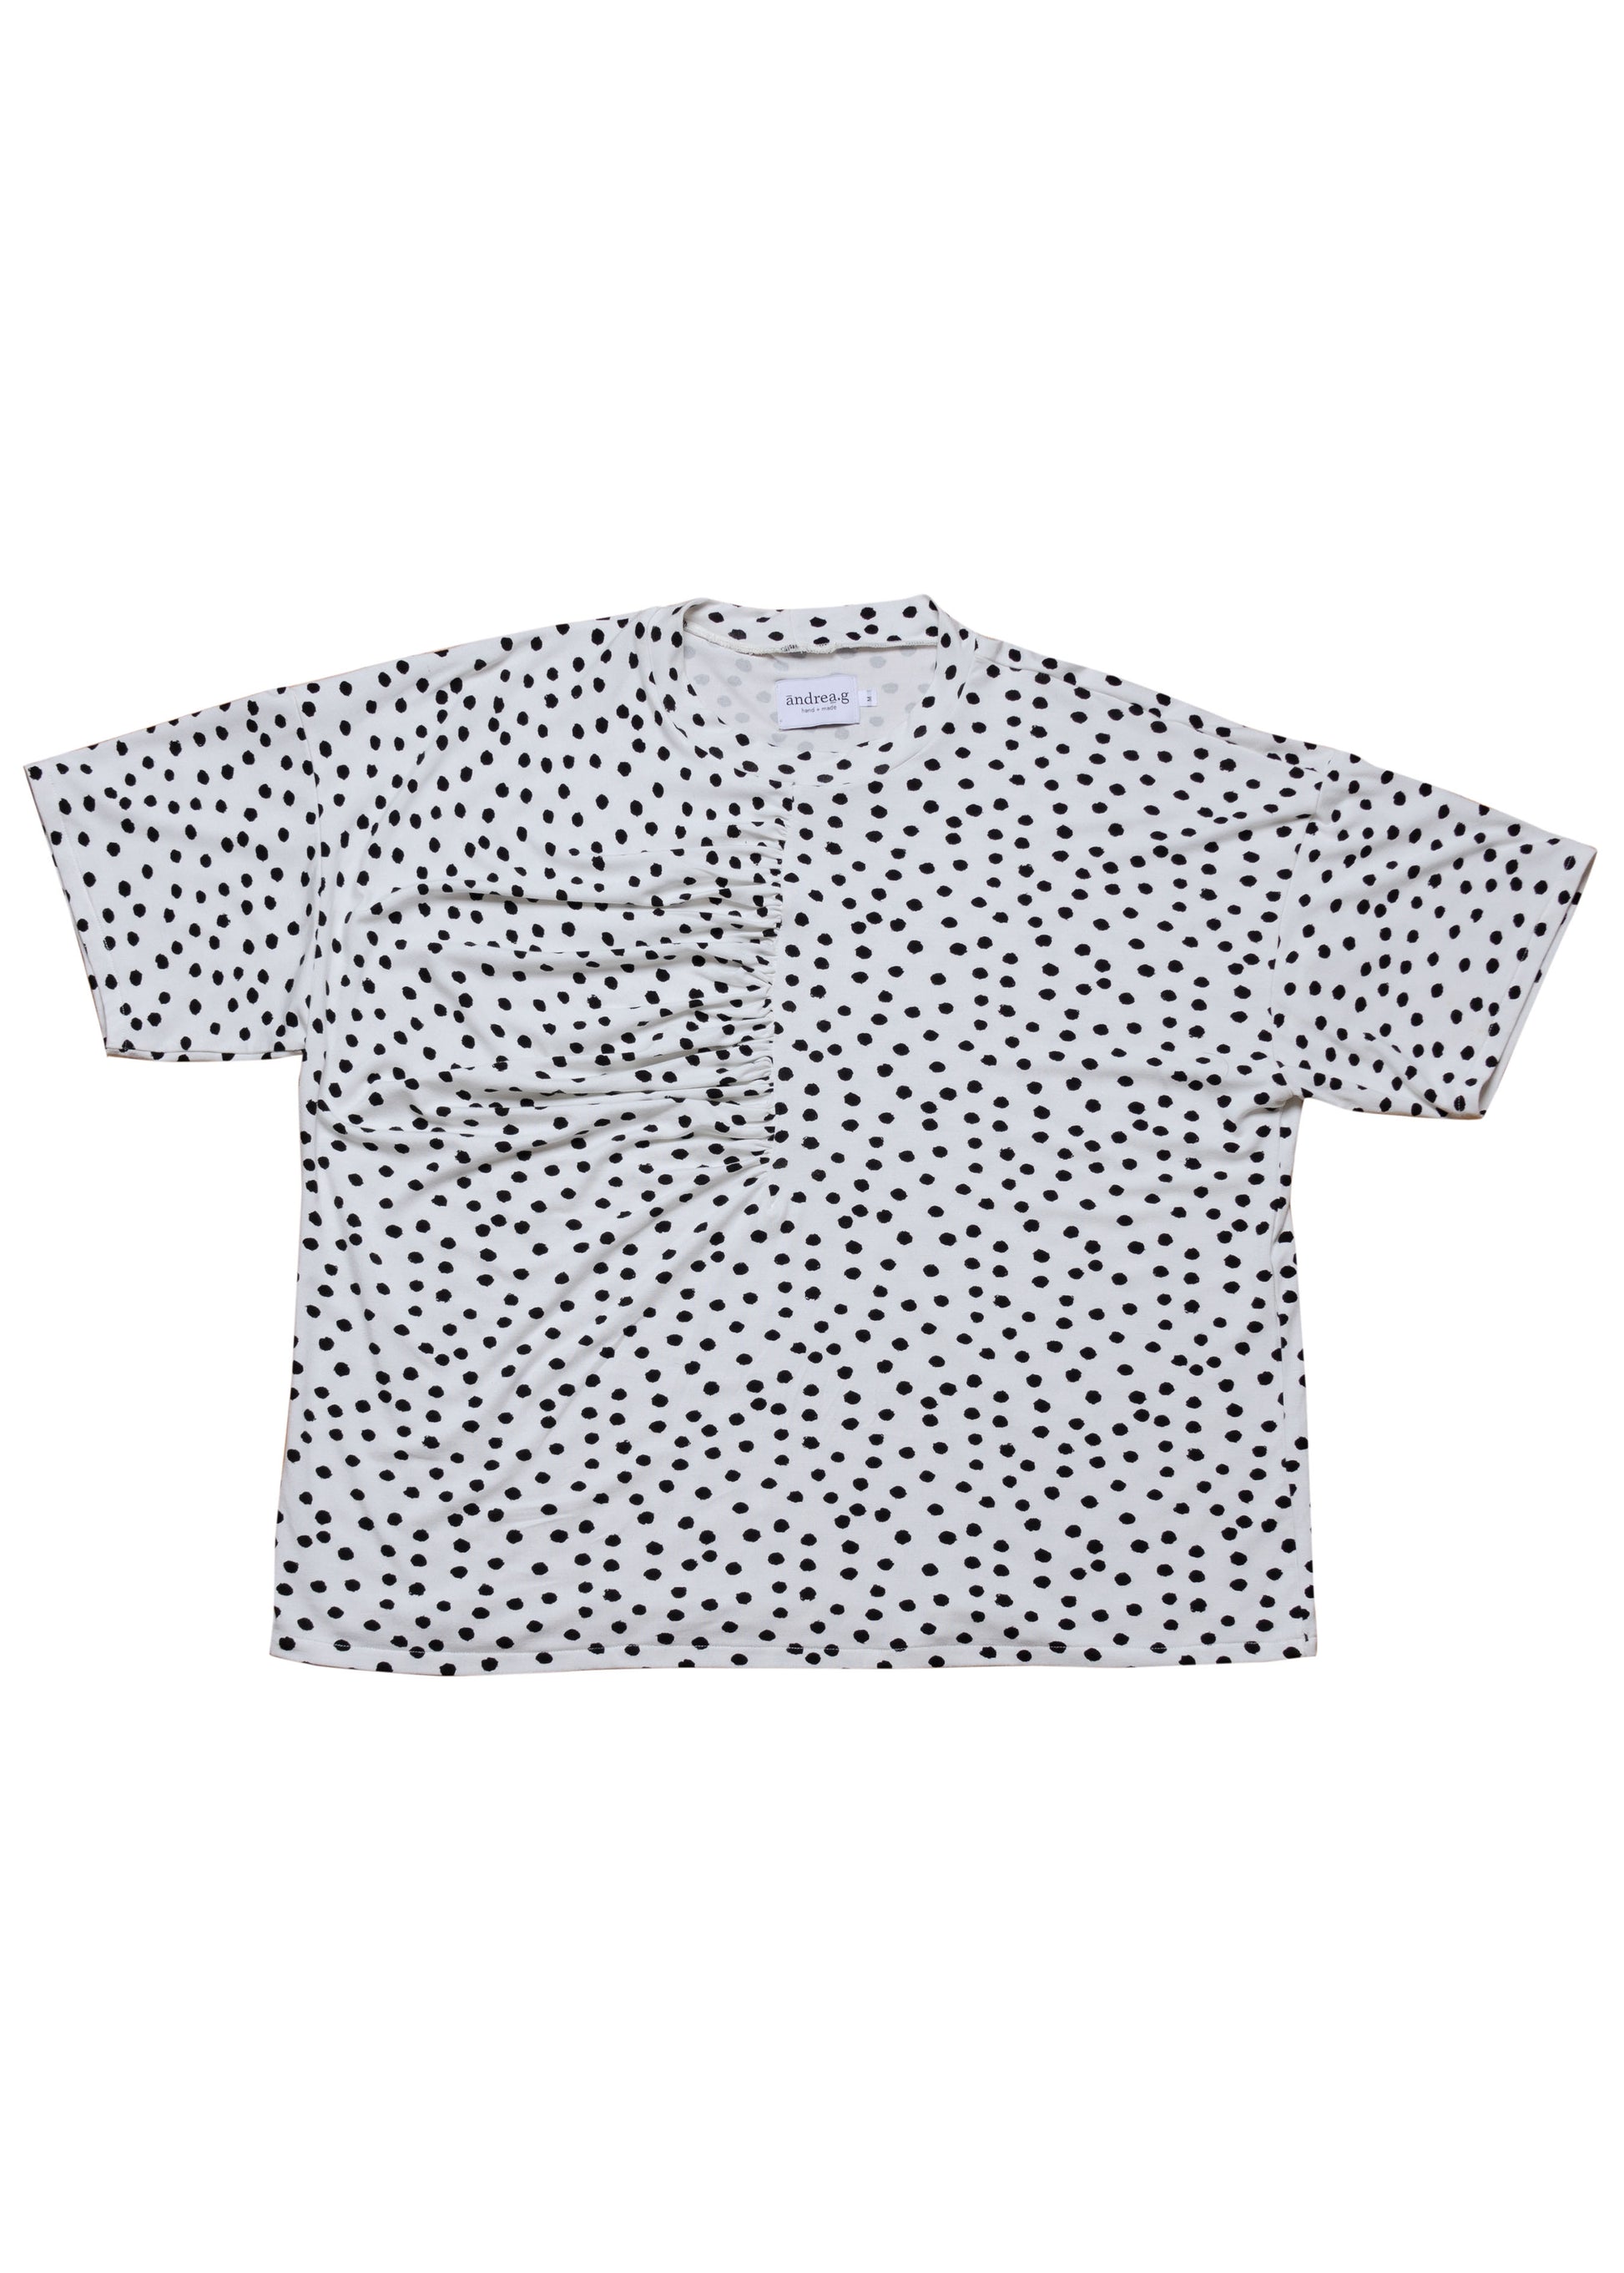 Cream oversized bamboo black and white polka dot t-shirt with gathering detail